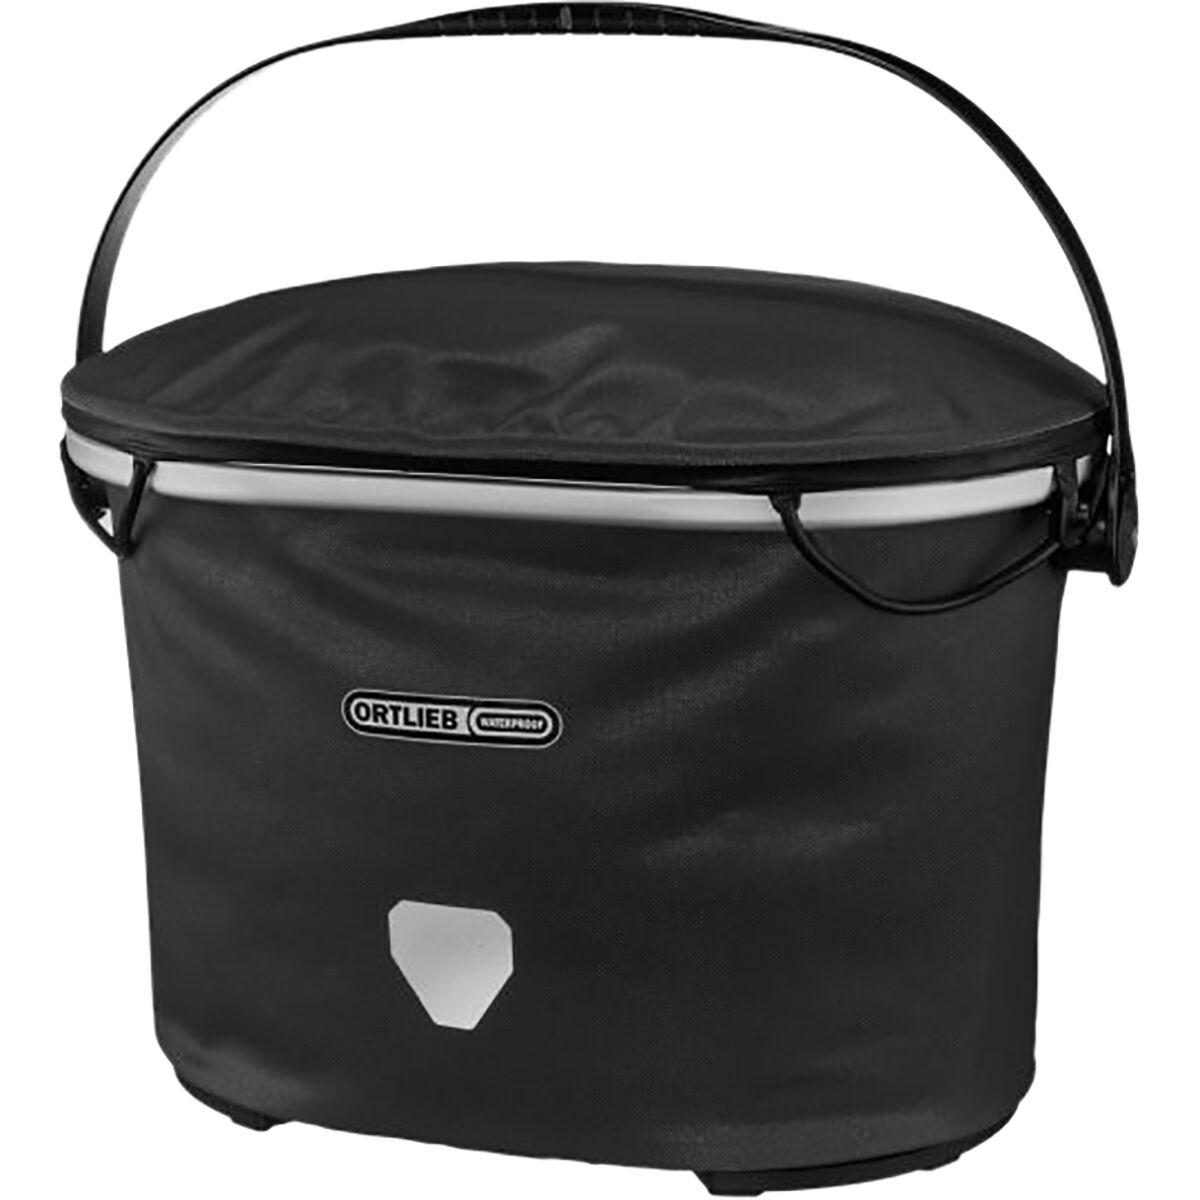 Ortlieb Up Town City Rack Bag